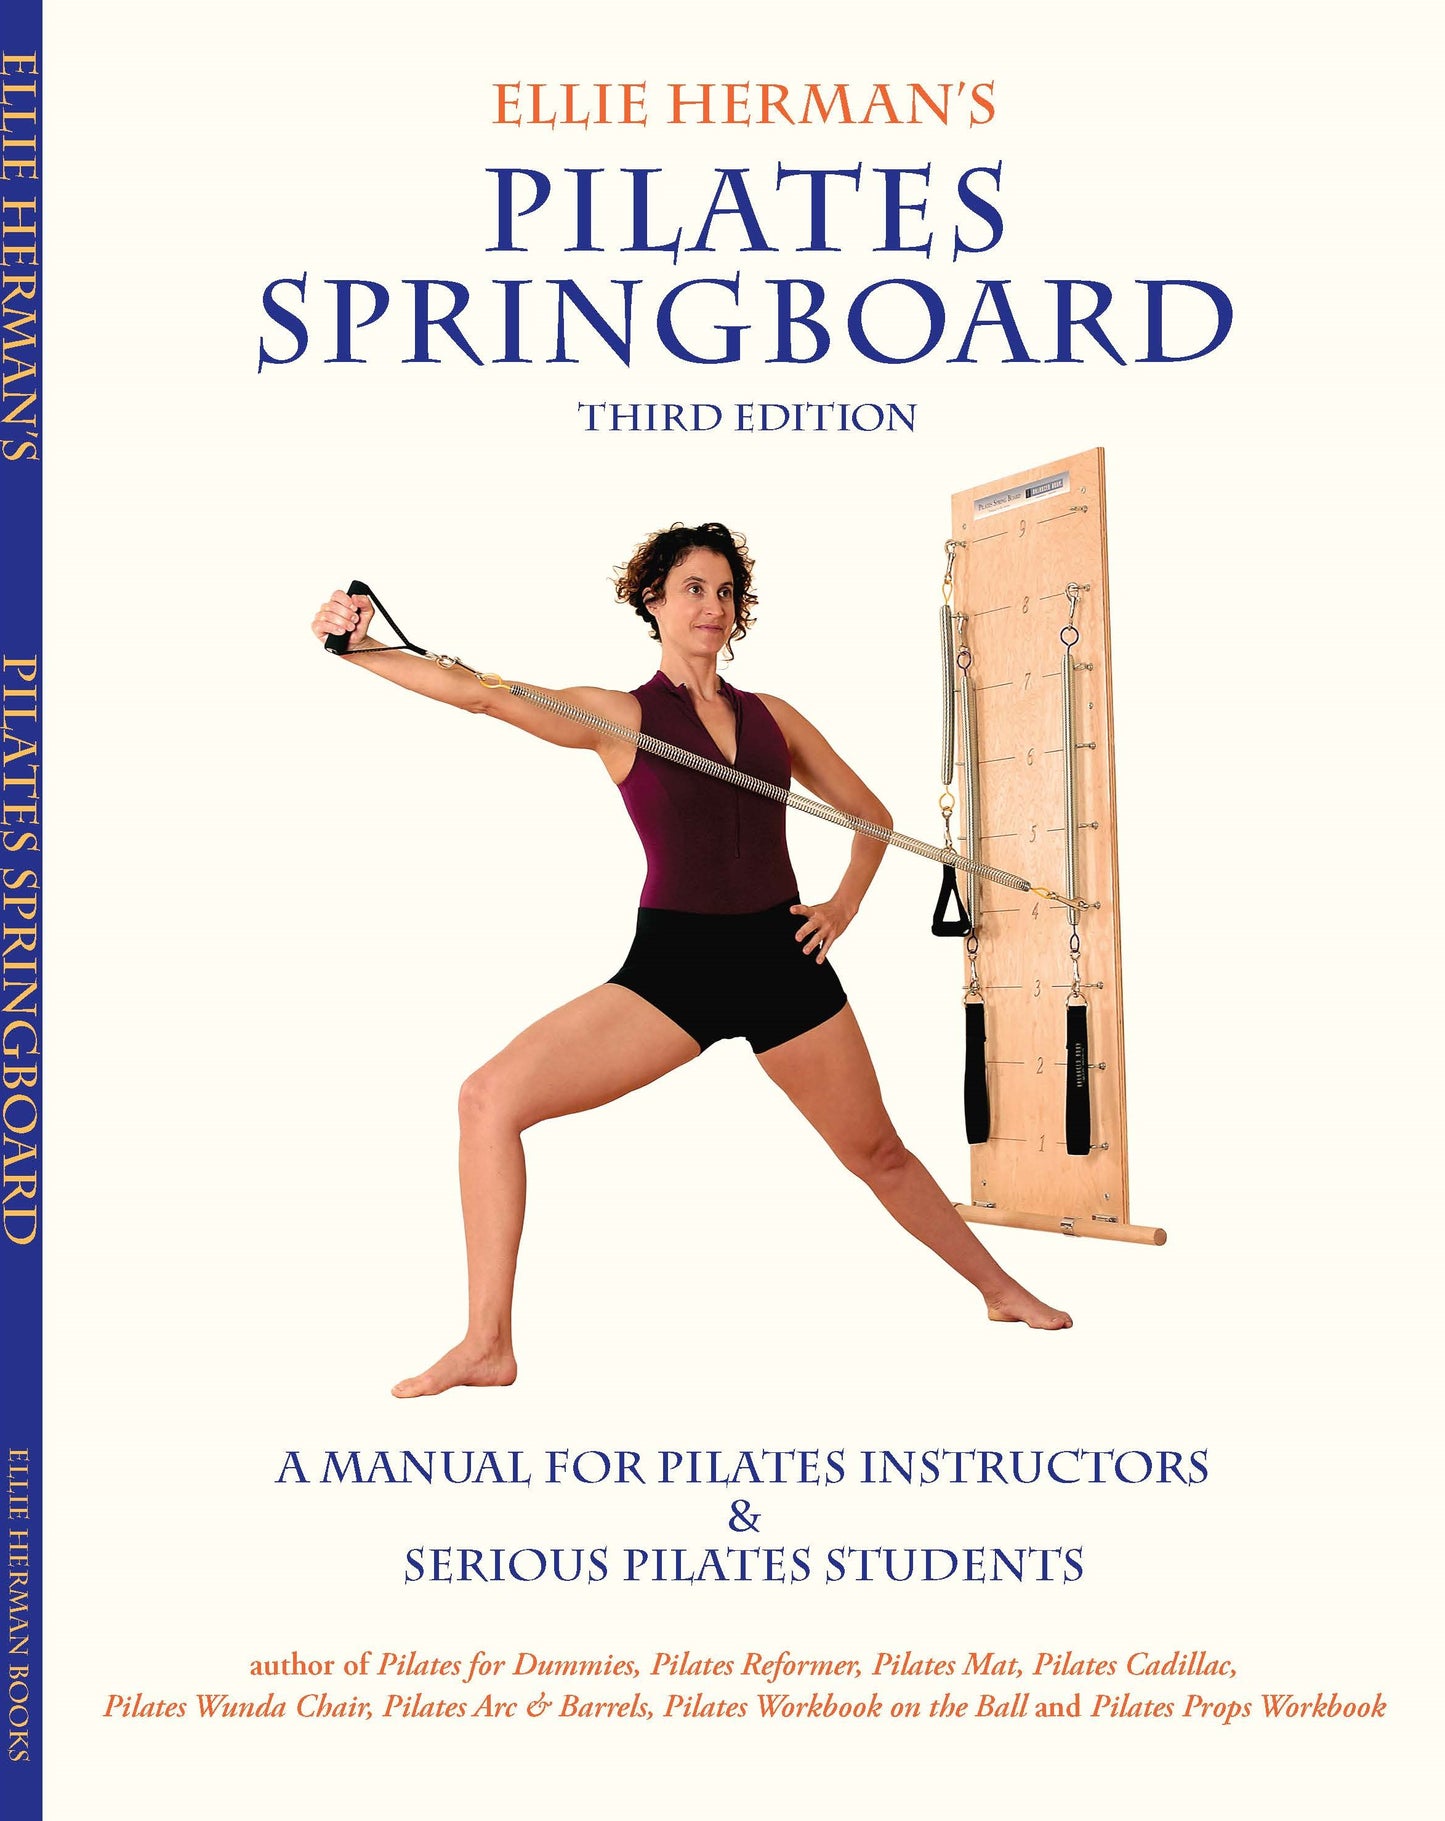 Ellie Herman's Pilates Springboard: A Manual For Pilates Instructors & Serious Pilates Students - PDF